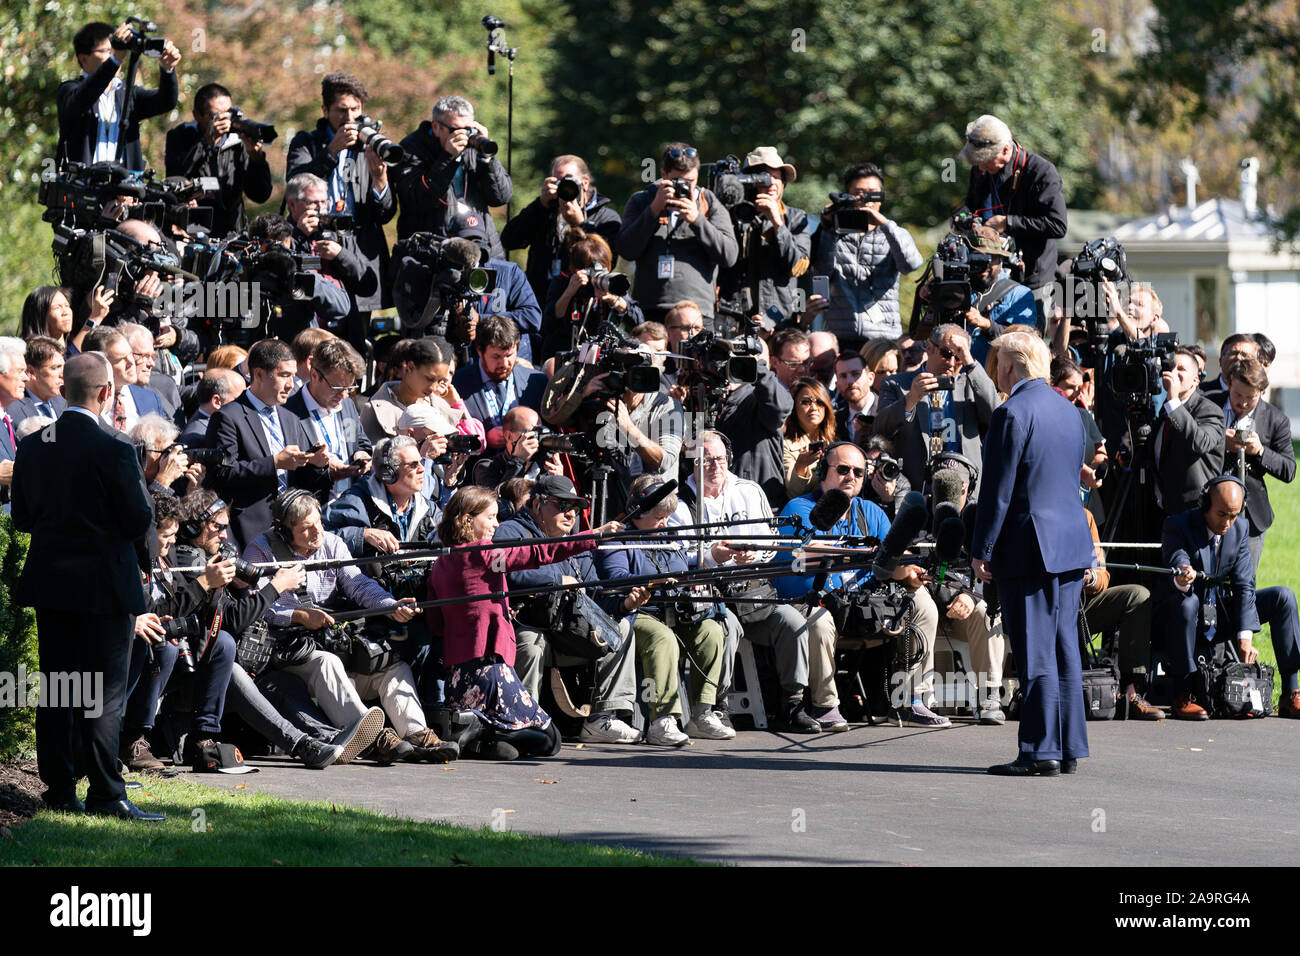 President Donald J. Trump talks to members of the press on the South Lawn driveway of the White House Wednesday, Oct. 23, 2019, prior to boarding Marine One to begin his trip to attend an energy conference in Pittsburgh. Stock Photo